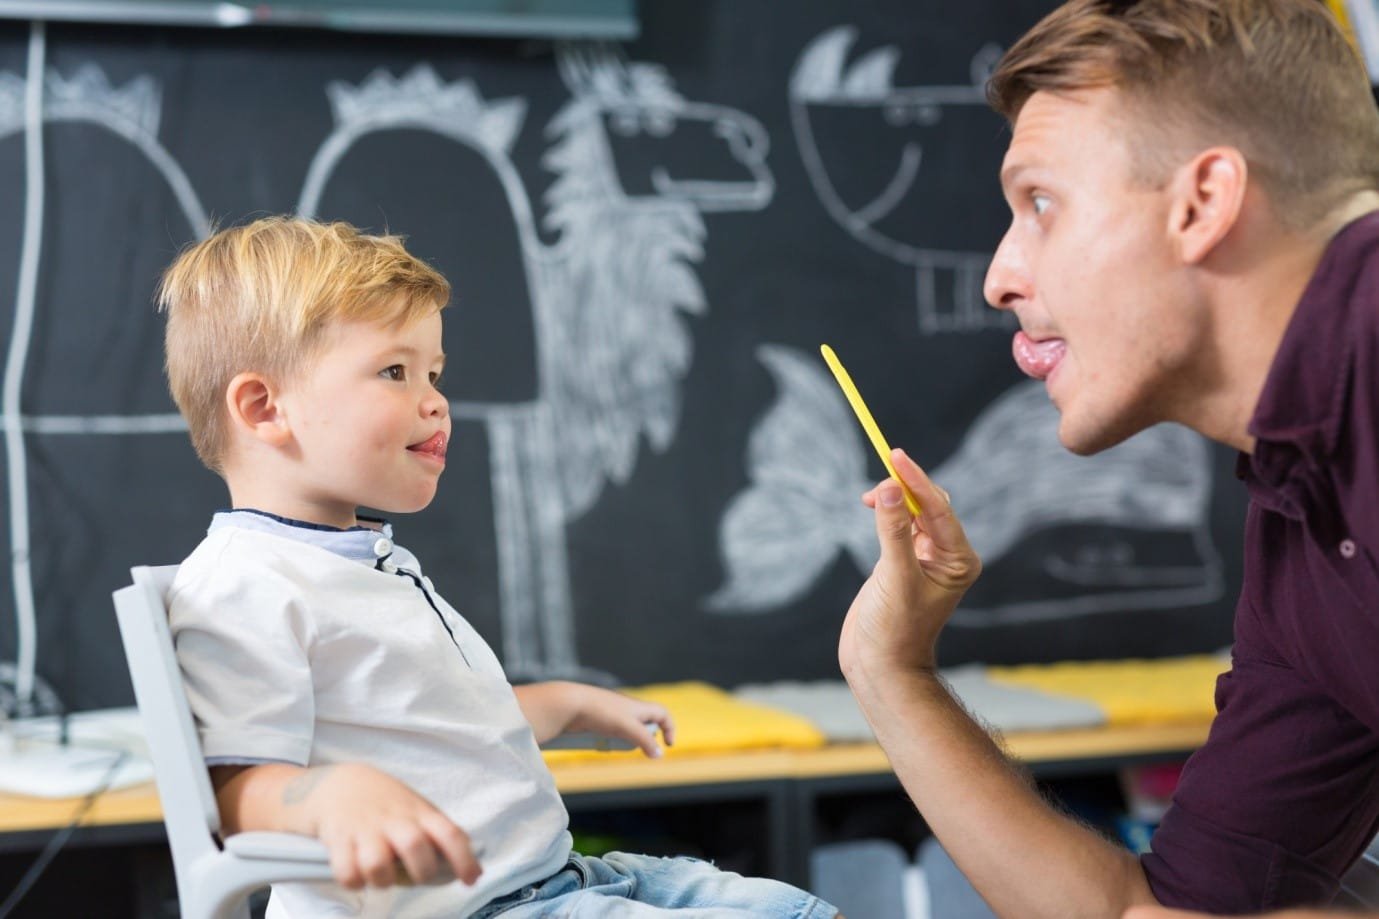 What Are The Different Types Of Speech Disorders